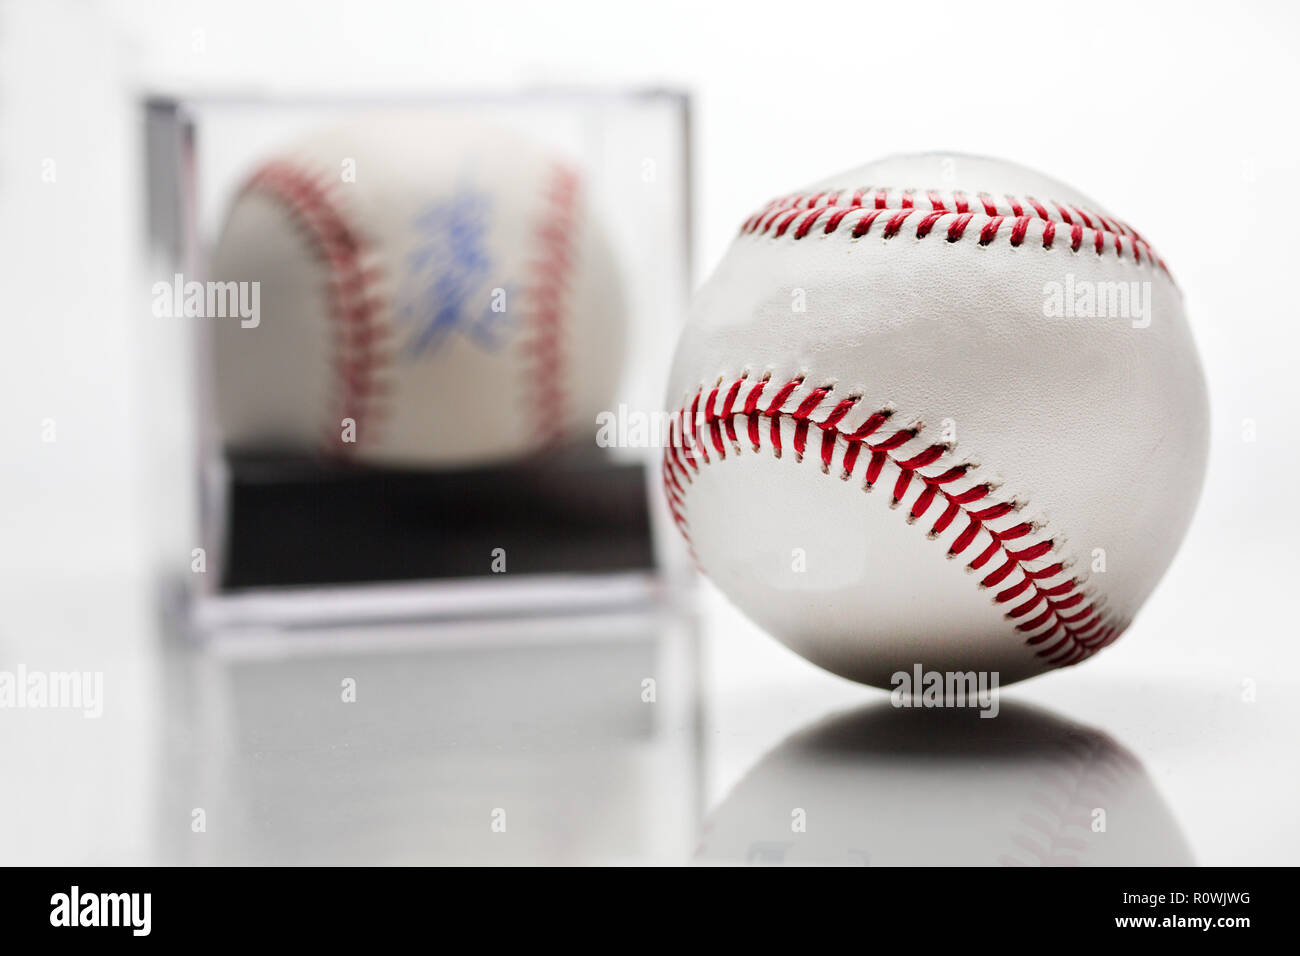 Baseball With Display Case Autographed Memorabilia Blurred In Background Isolated On White Stock Photo